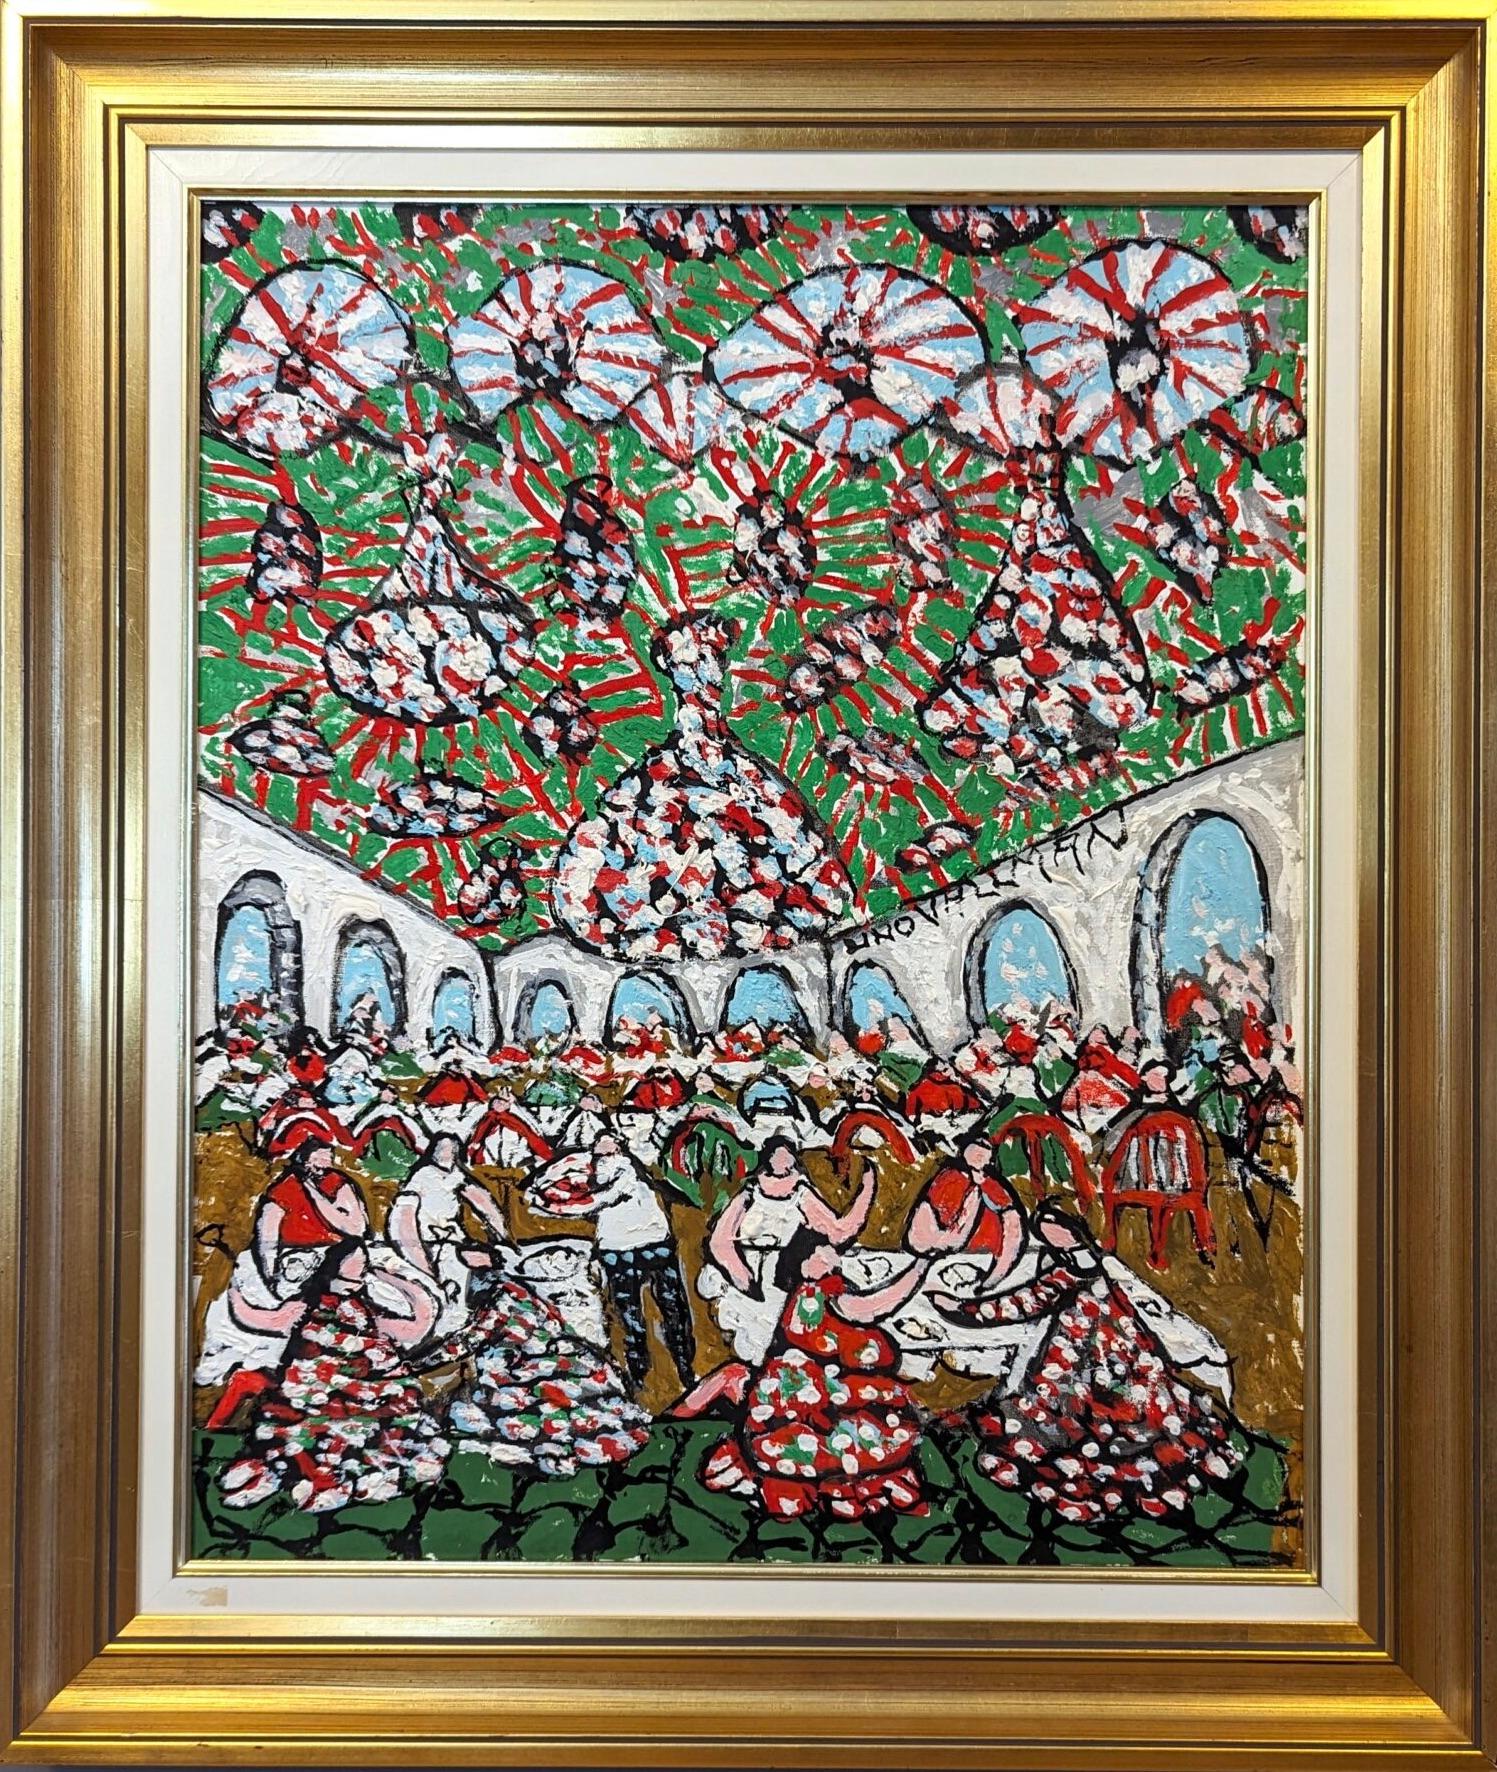 THE BANQUET
Size: 76 x 64.5 cm (including frame)
Oil on Canvas

A very lively and playful mid-century composition in oil, painted by Swedish artist Uno Vallman (1913-2004) whose works are included in the Swedish National Museum and The Swedish